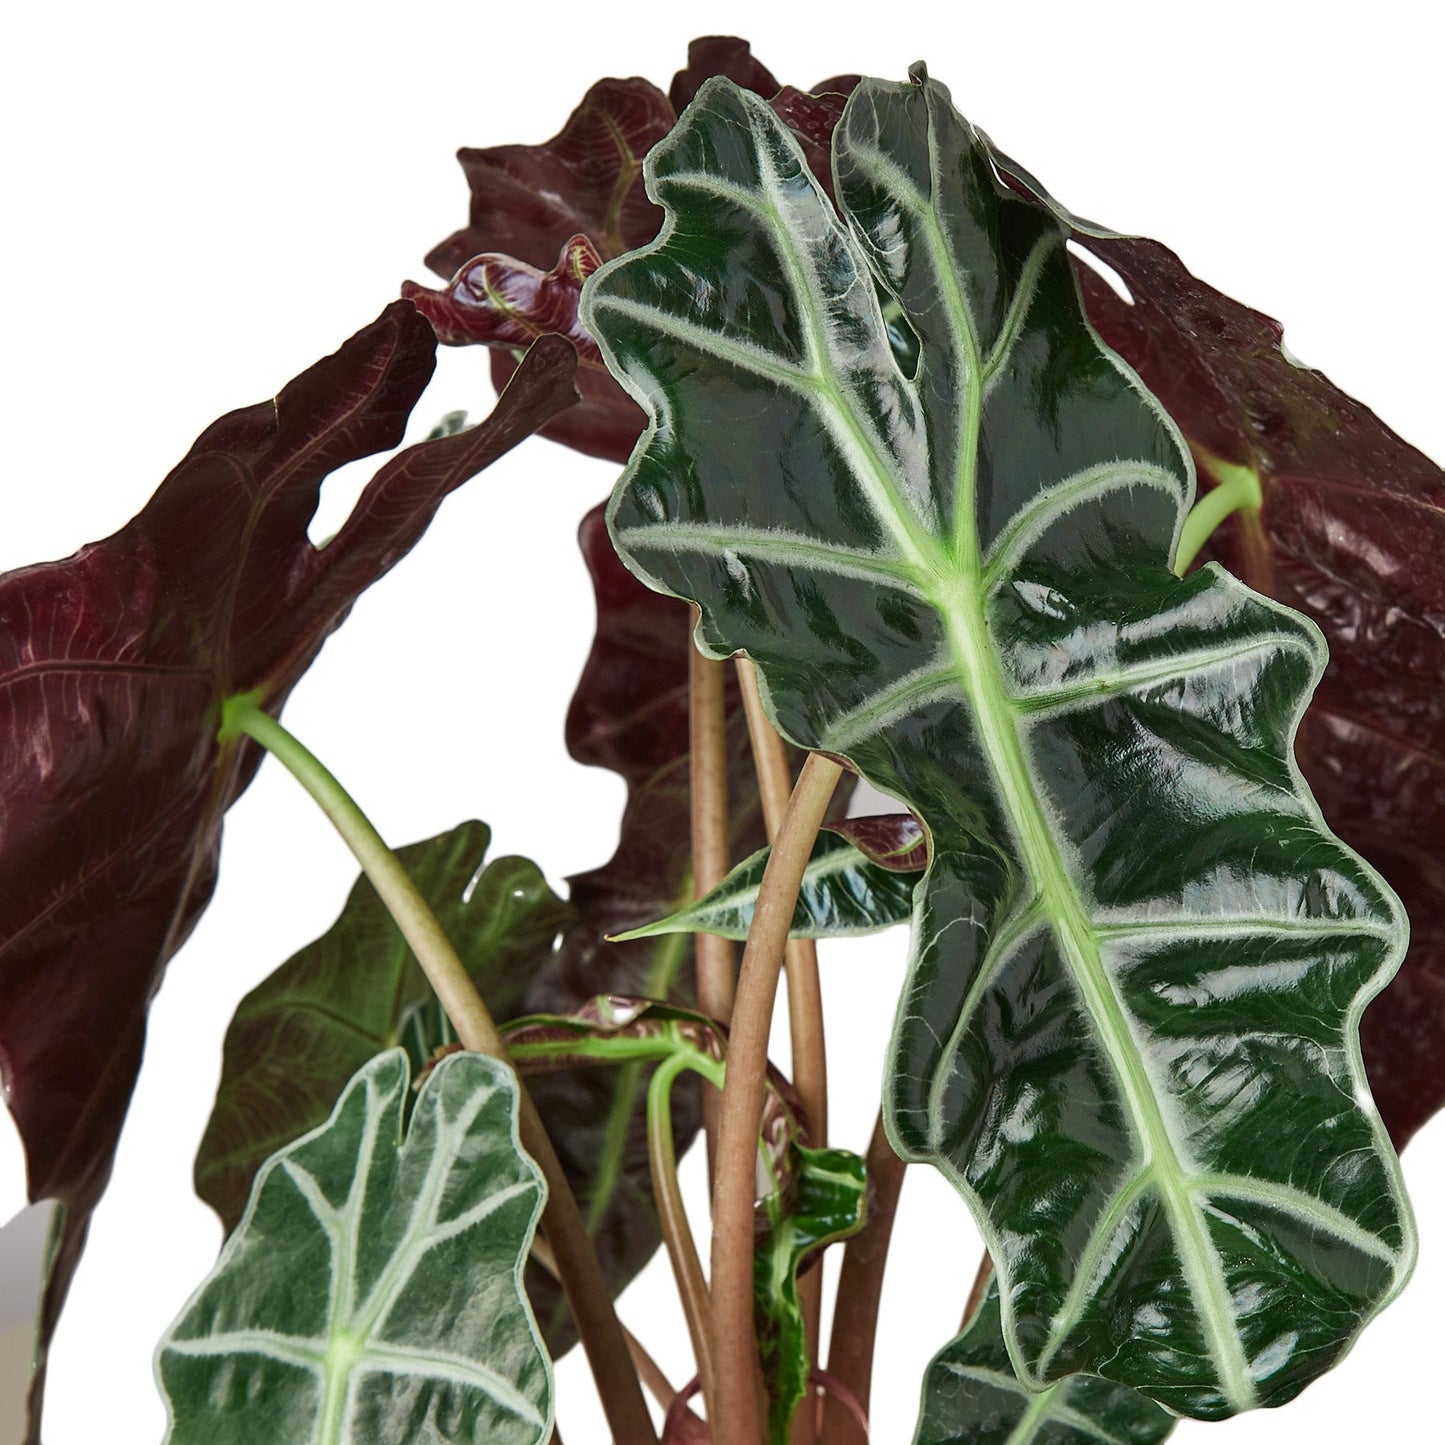 Alocasia Polly 'African Mask' - 4" Pot - NURSERY POT ONLY - One Beleaf Away Plant Studio